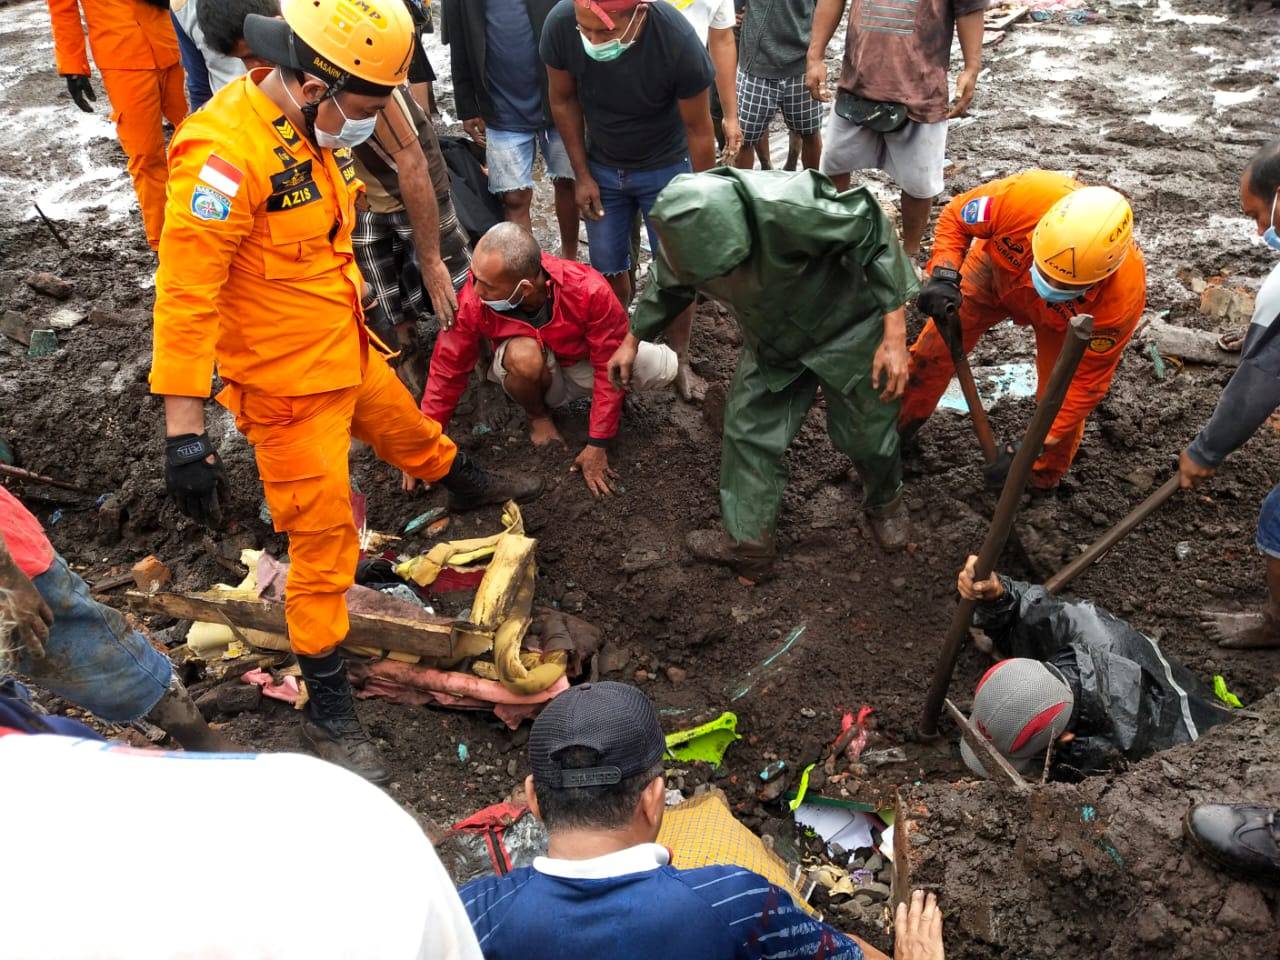 Indonesia rescue agency search for a body at an area affected by flash floods after heavy rains